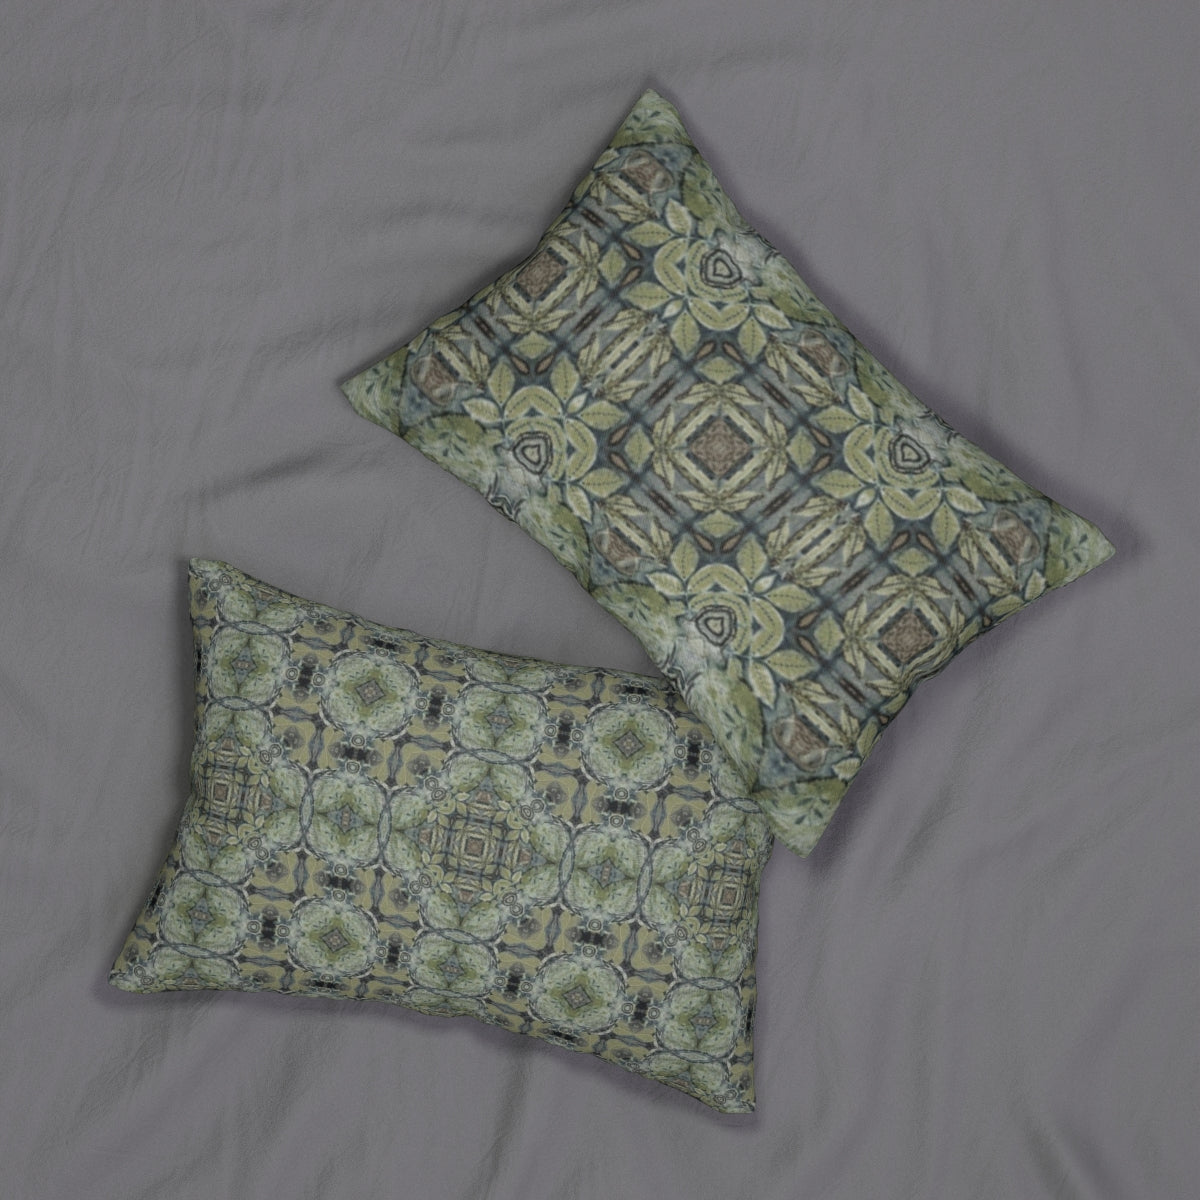 Different design on each side of boho chic lumber pillow